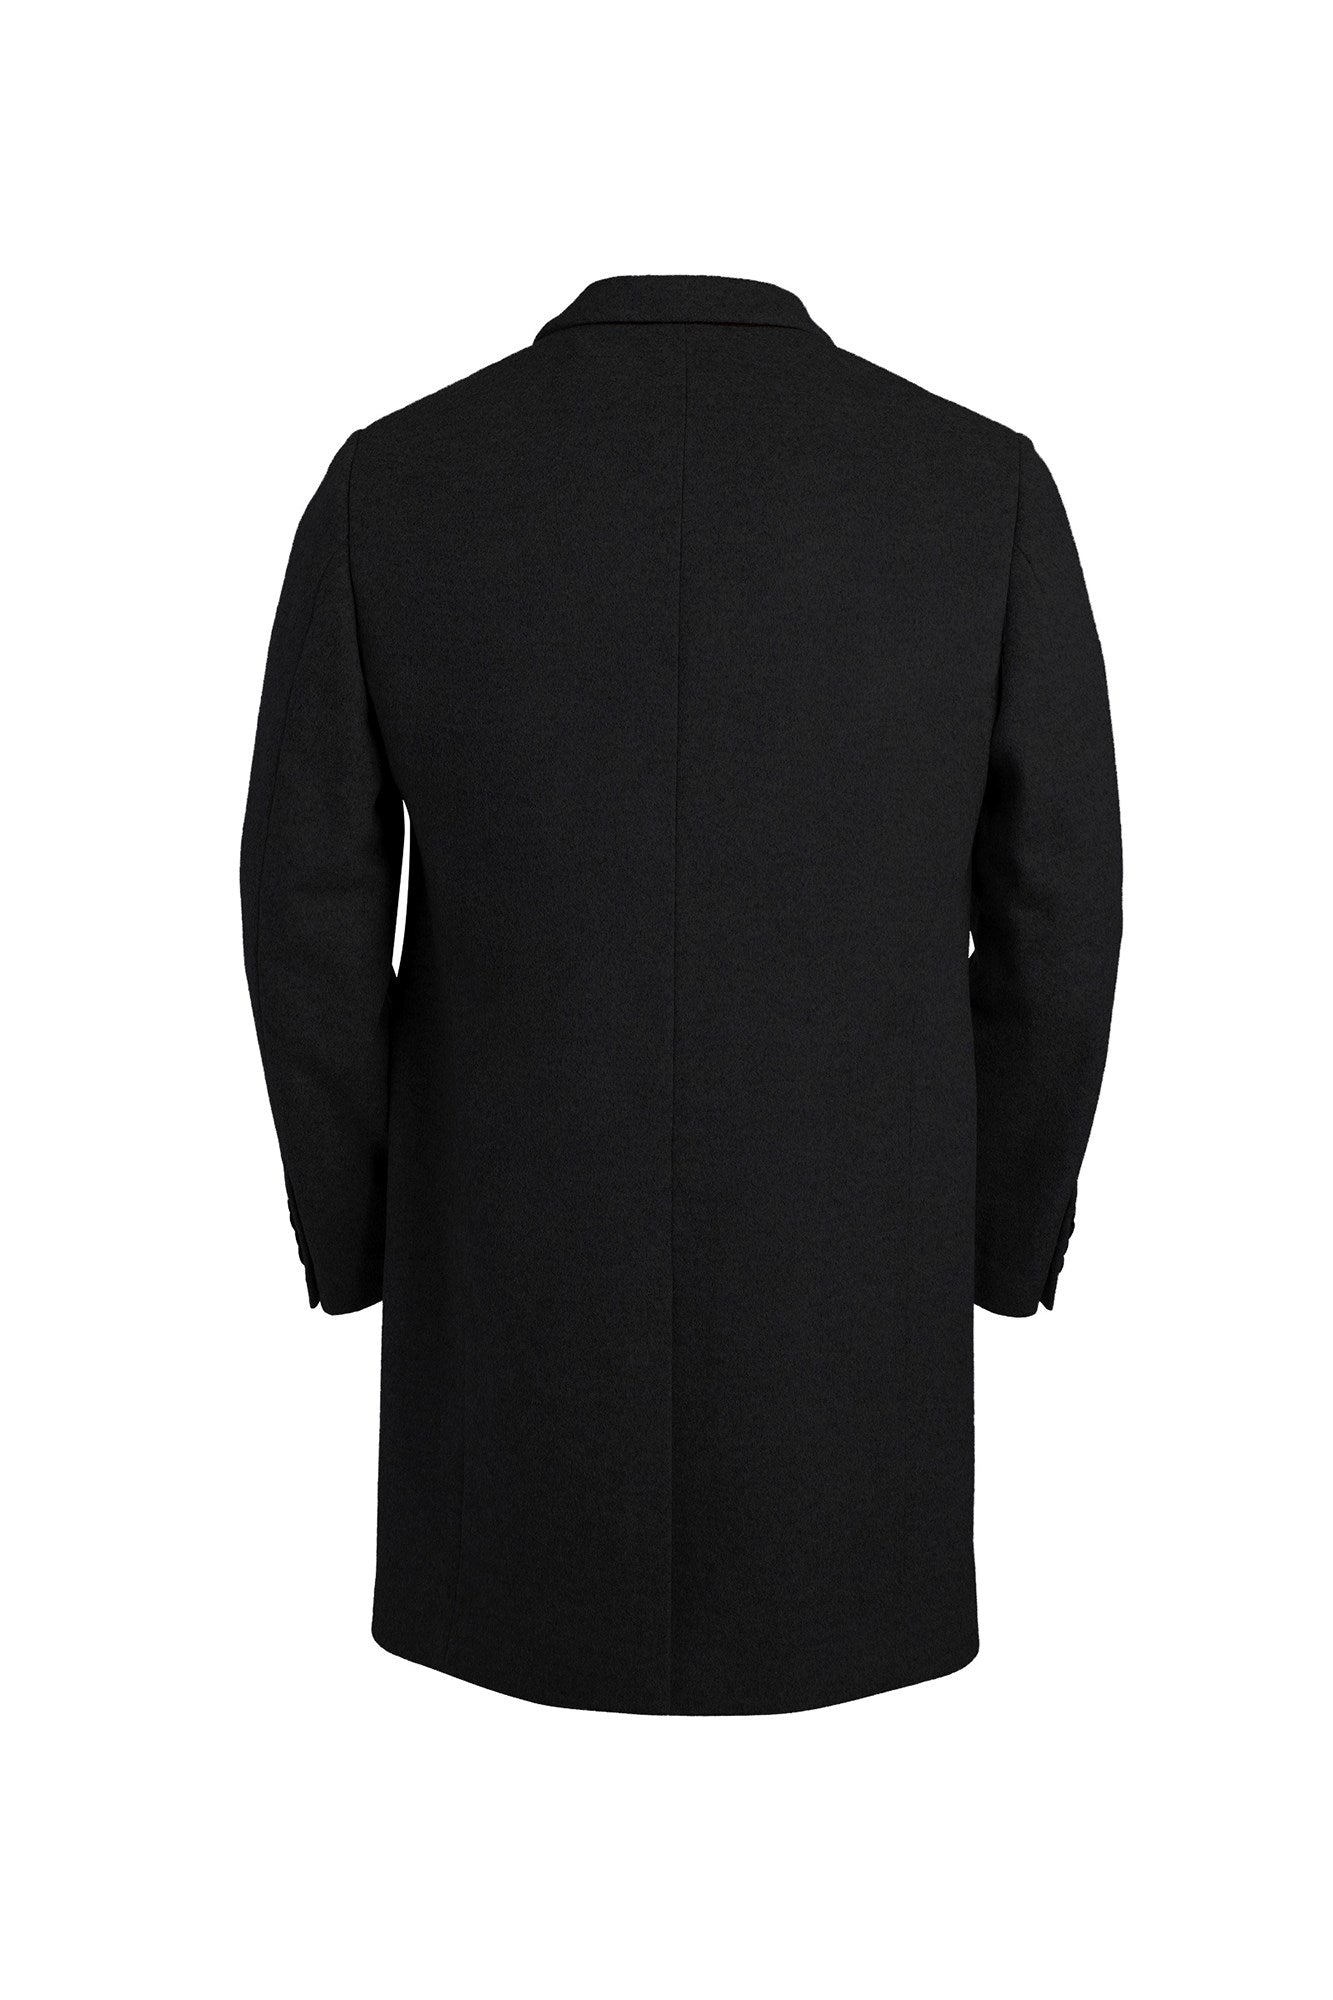 SUTTON BLACK WOOL OVERCOAT - MENS - Cardinal of Canada-US-Sutton - Black wool topcoat 38 inch length